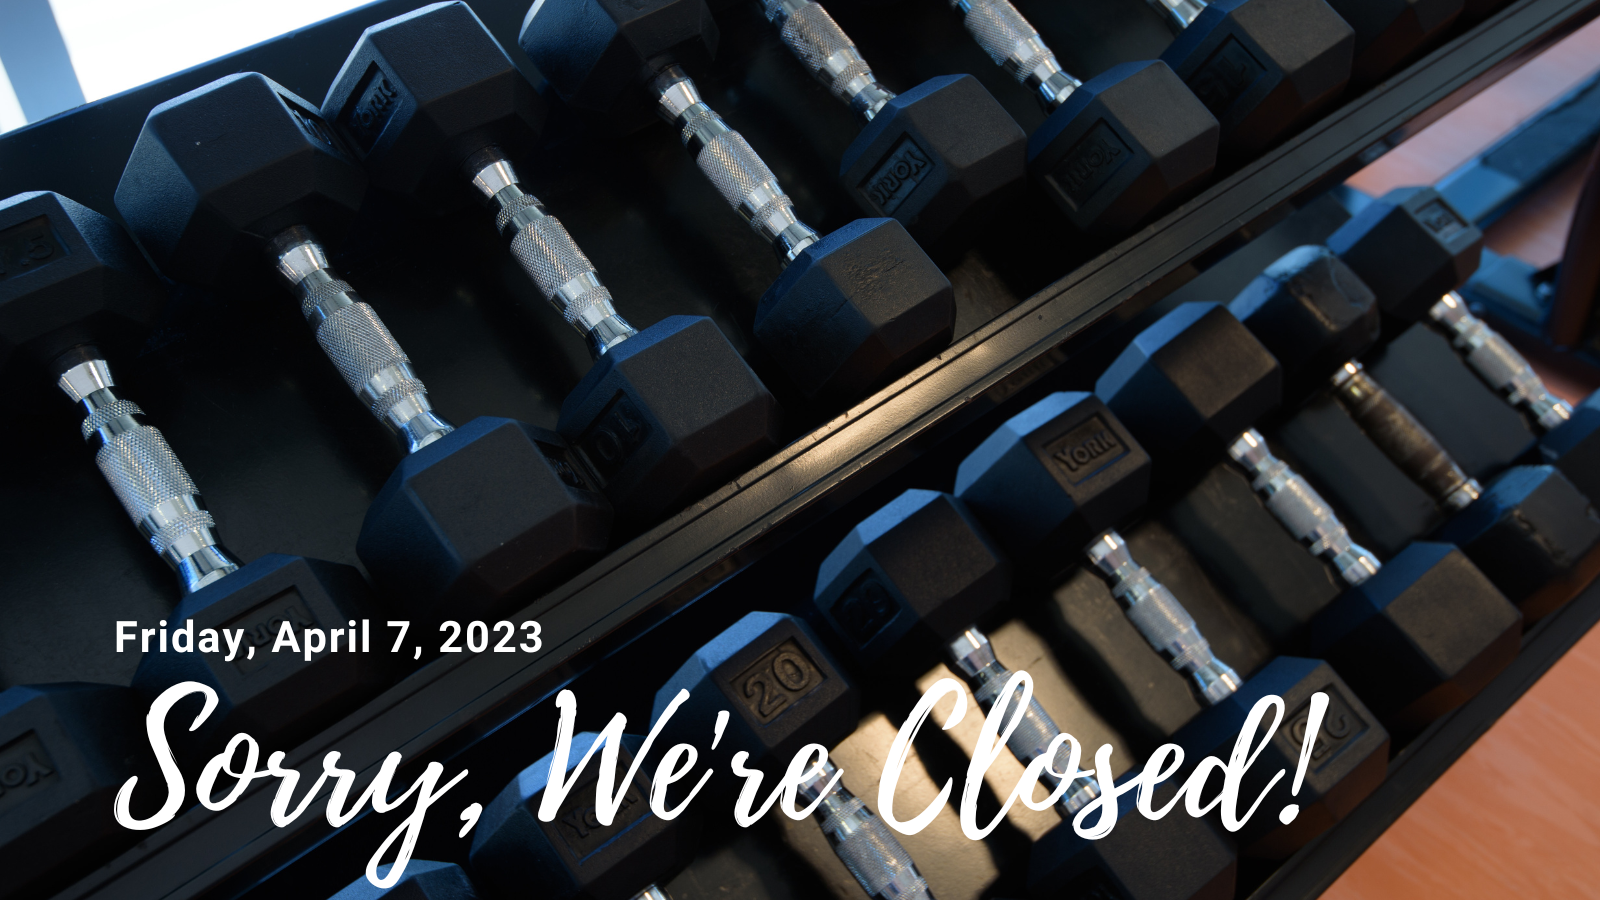 Text: Closed Friday April 7, 2023. Photo of rows of free weights.